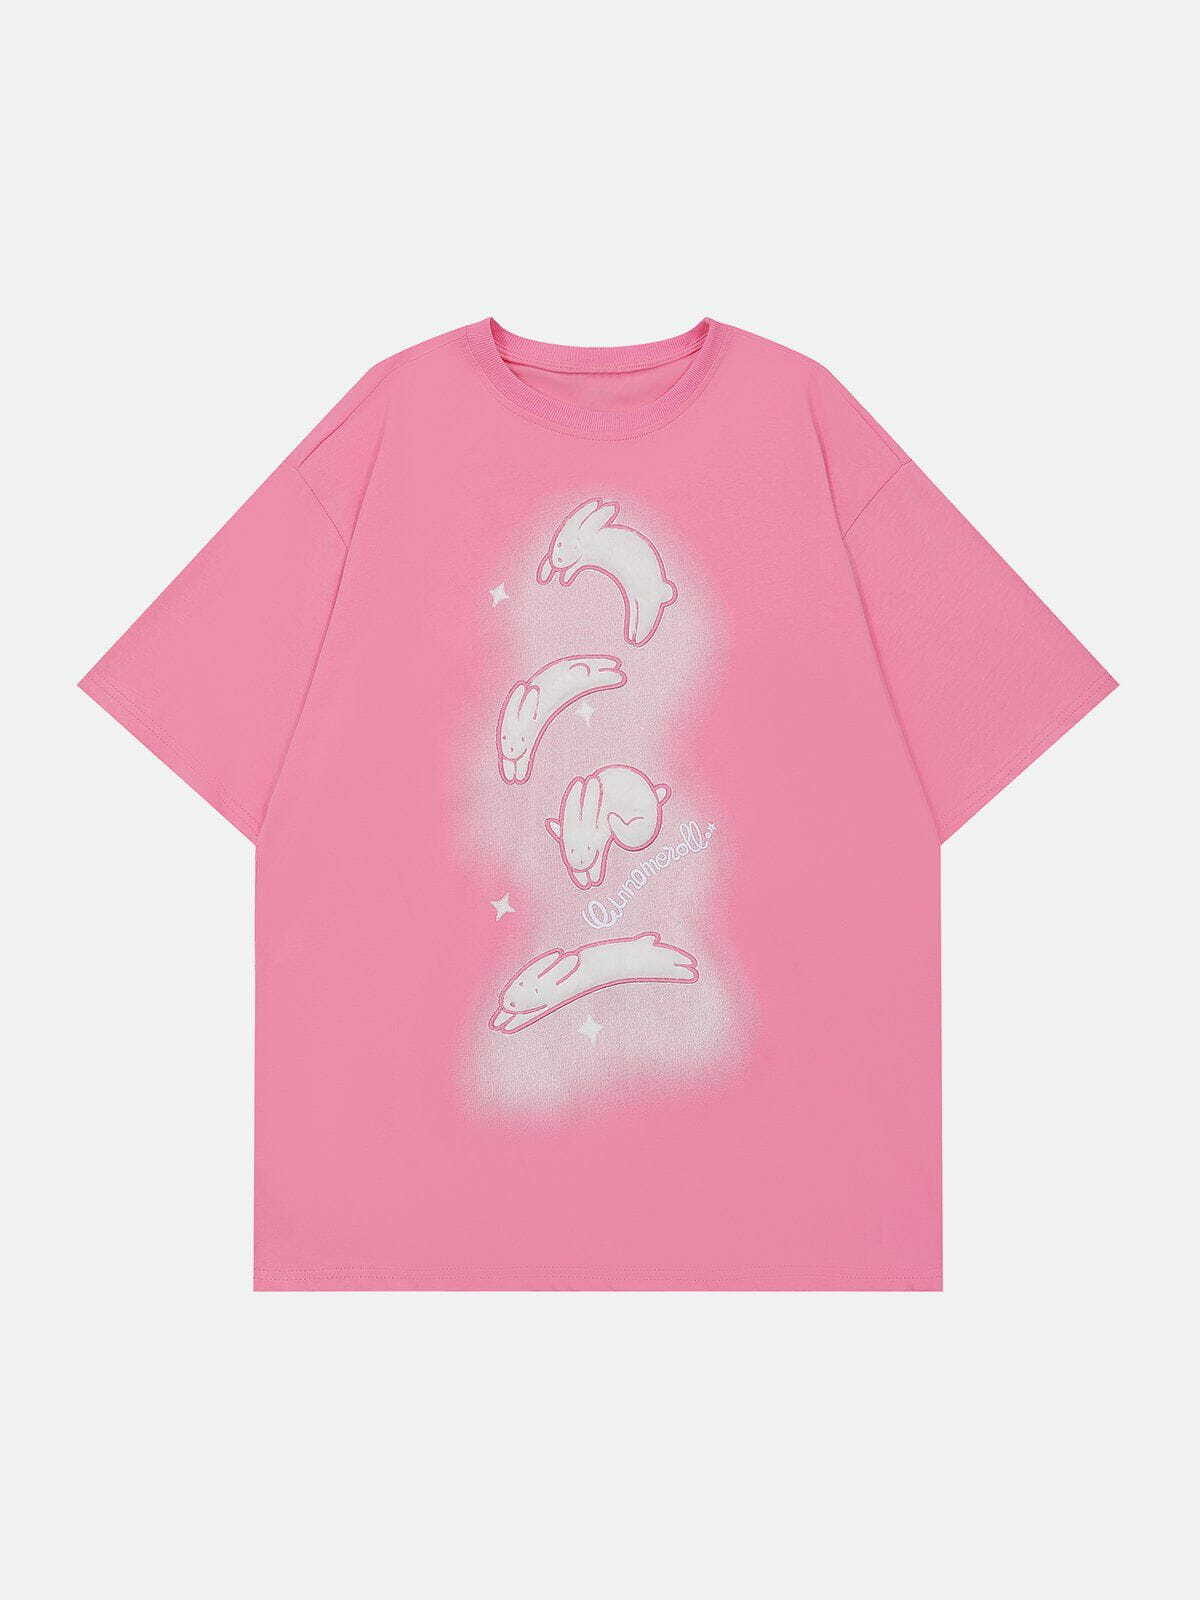 embroidered rabbit tshirt youthful and quirky streetwear 1846